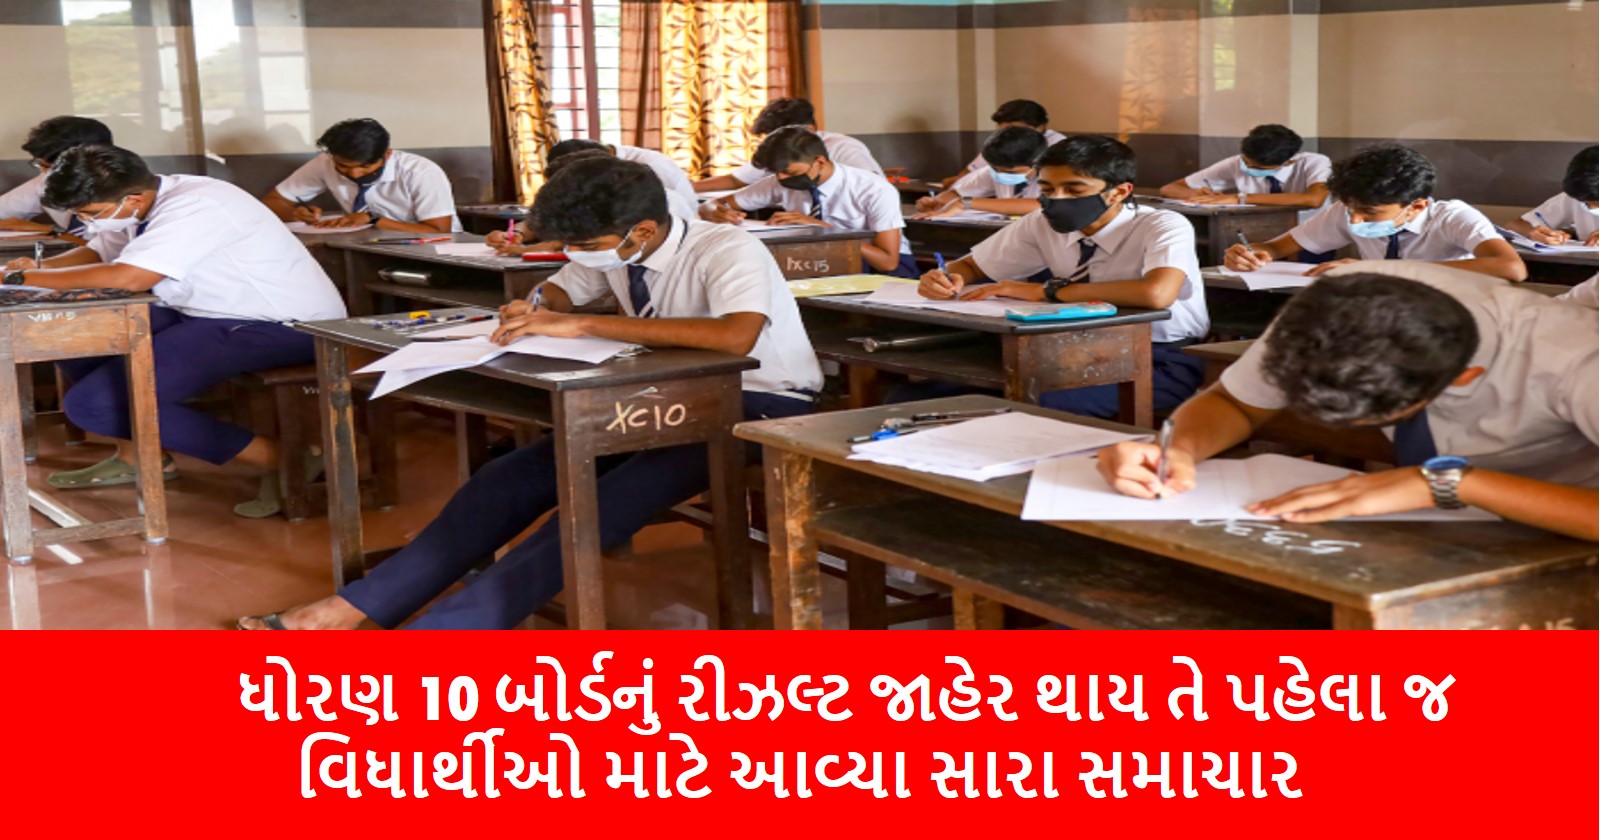 Good news came for the students even before the results of the class 10 board were announced